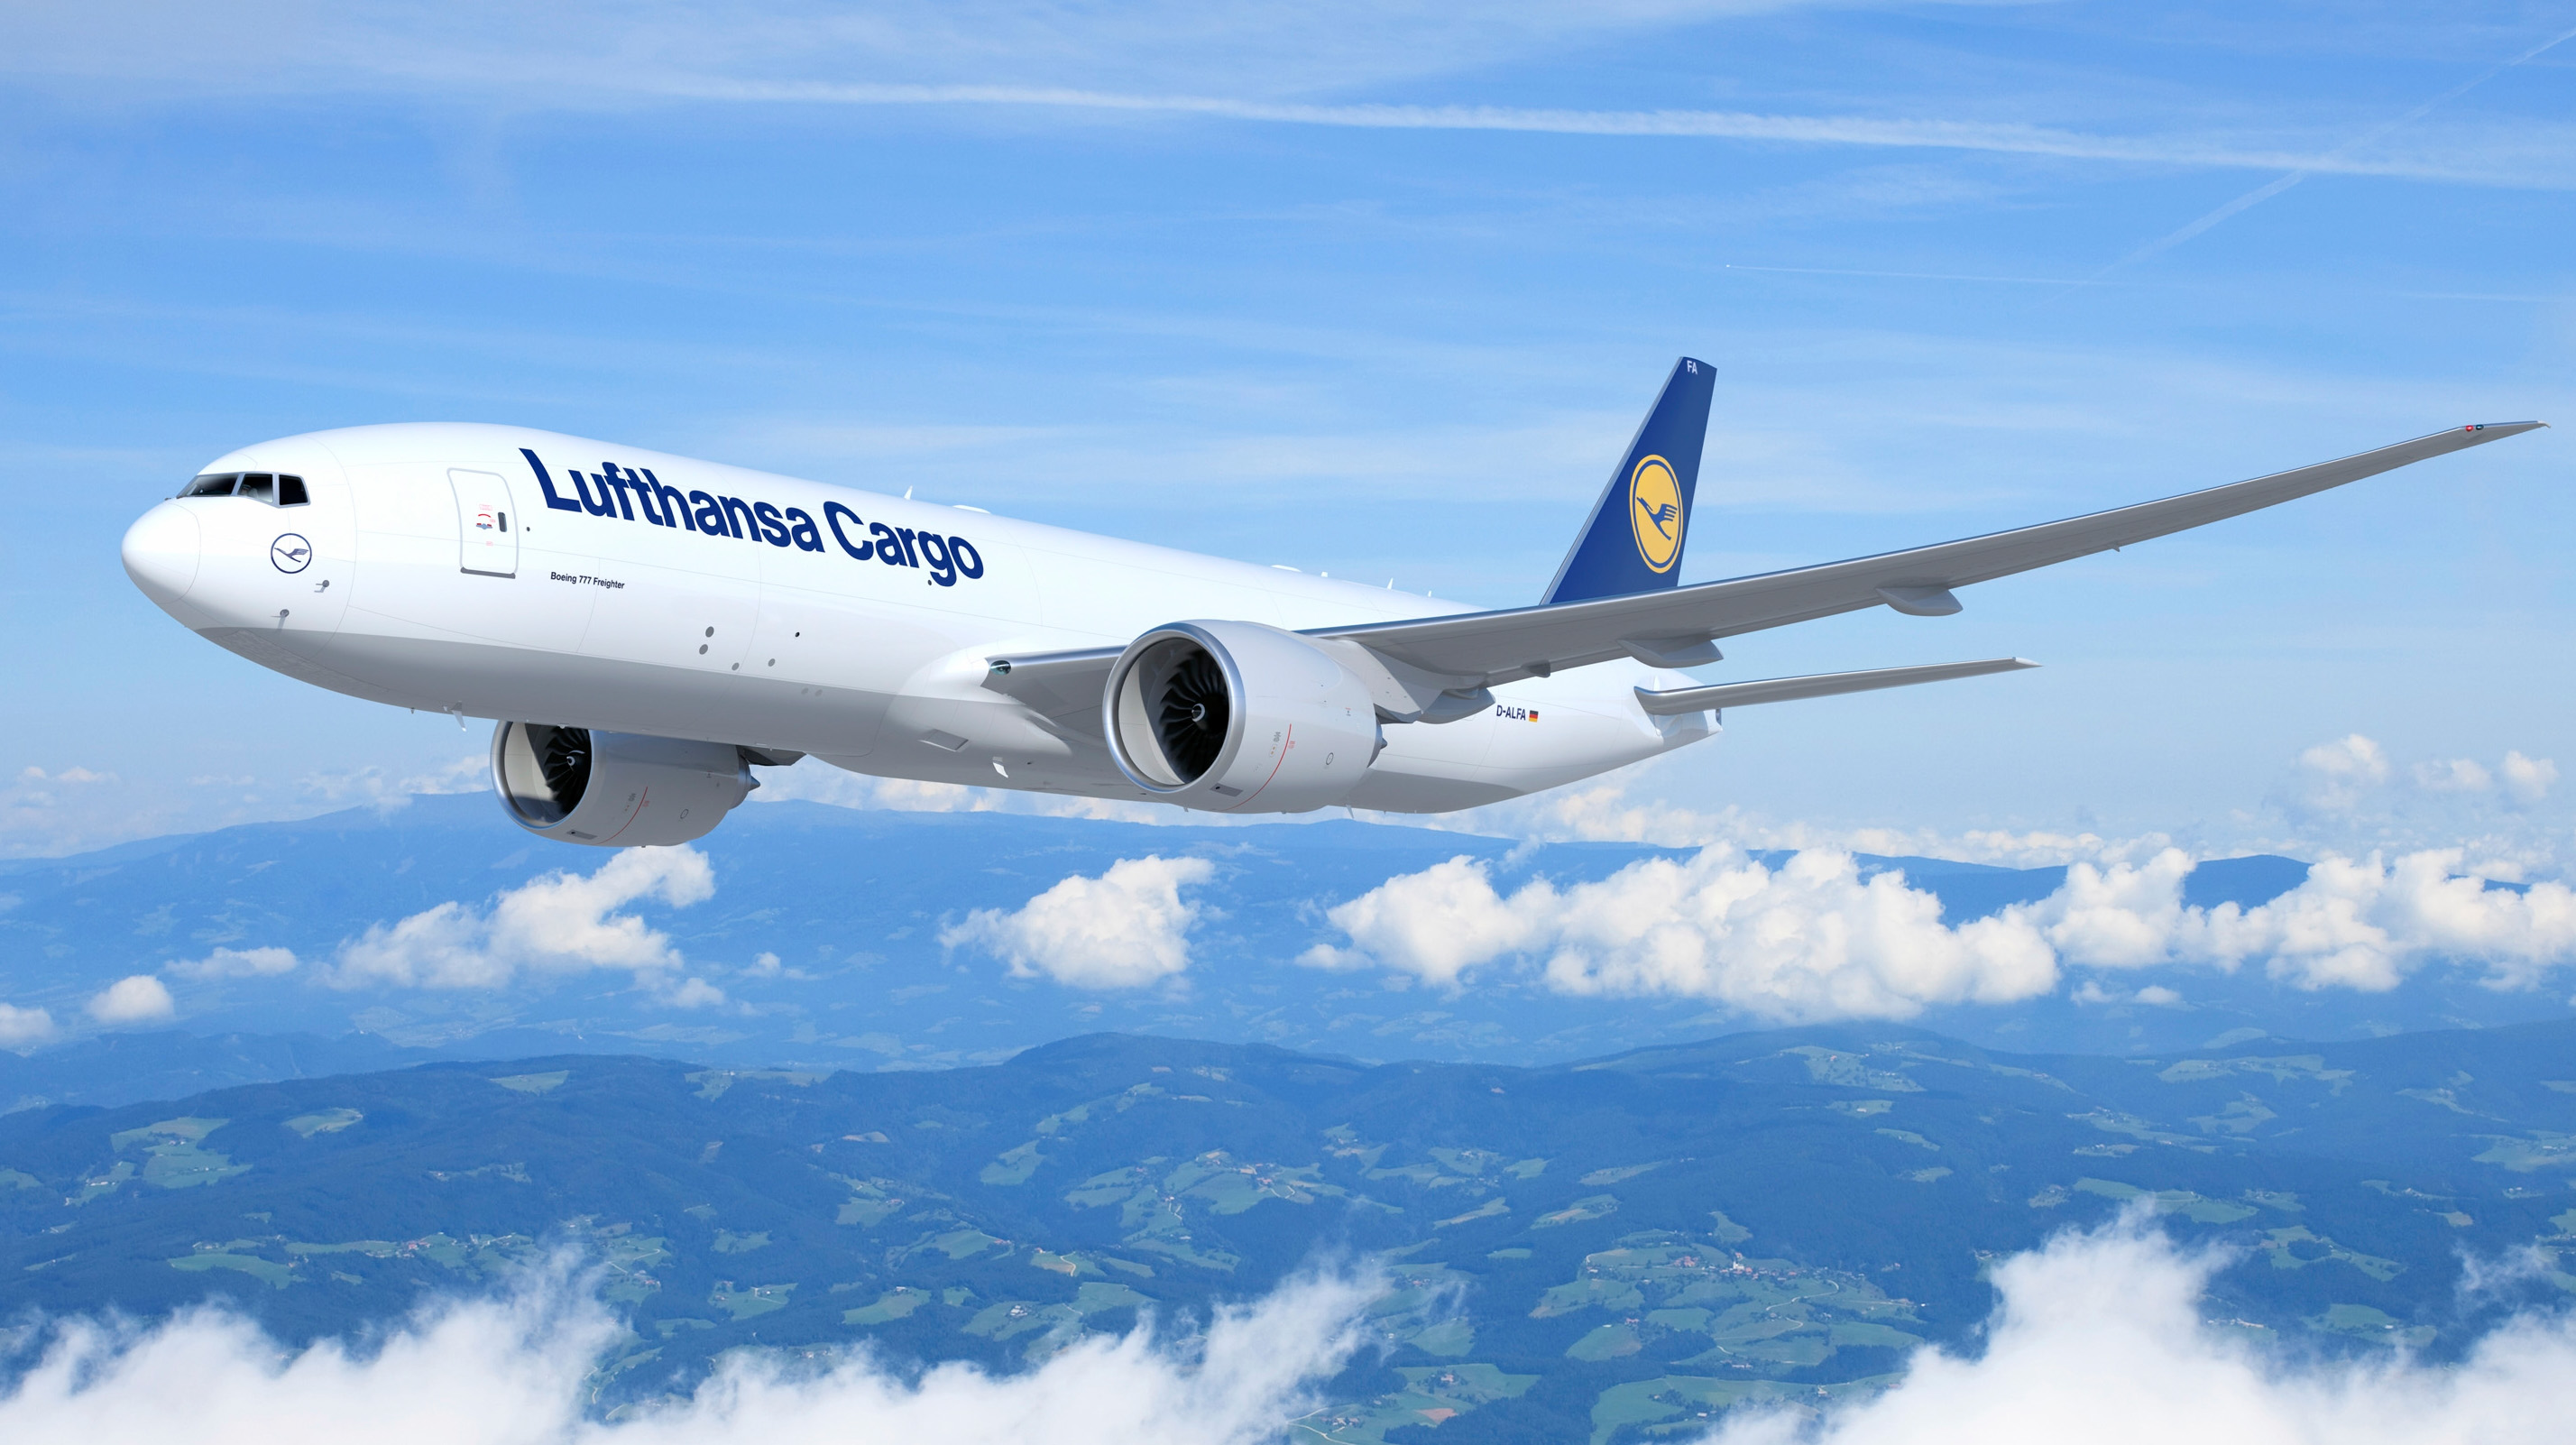 Lufthansa Cargo aims to quickly fly out of the red